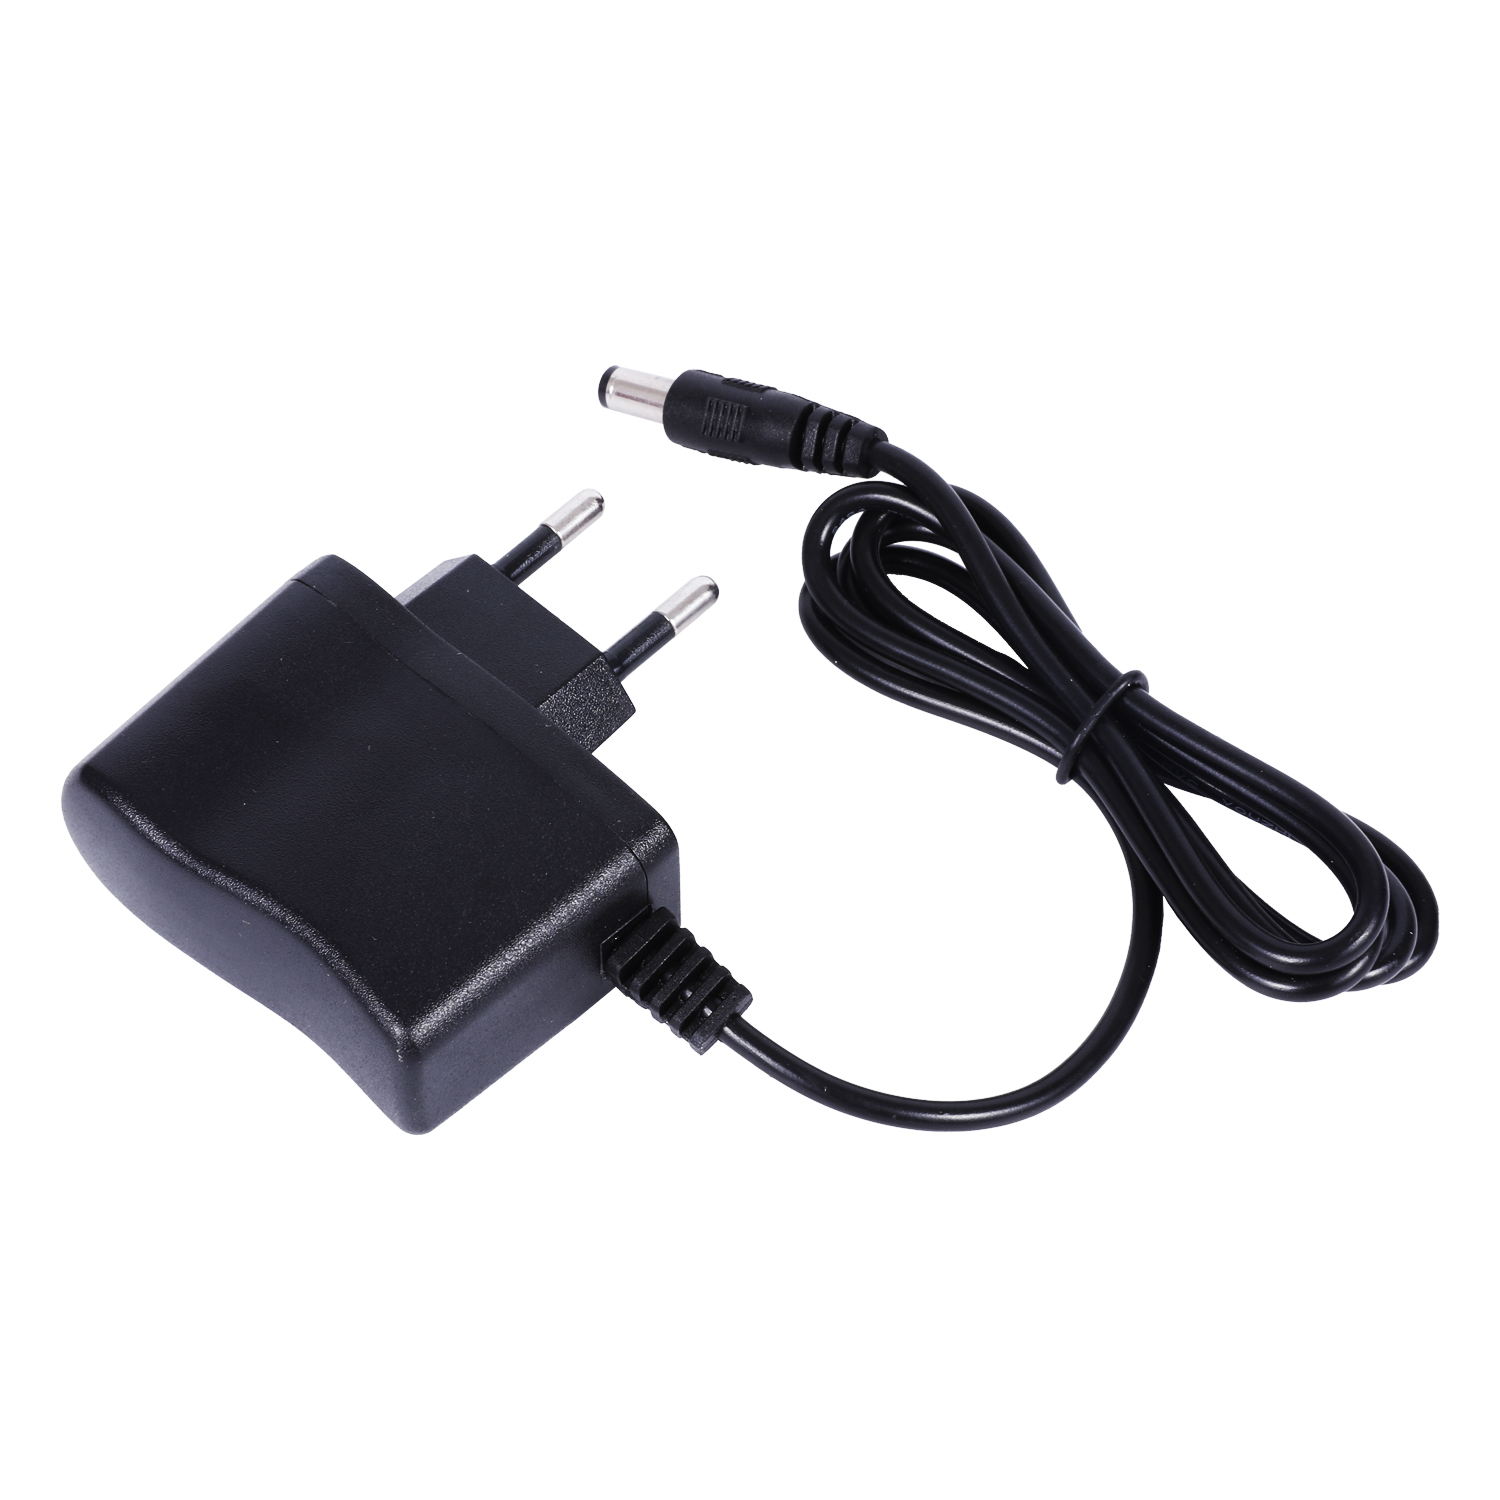 What is a charger and what is a power adapter?